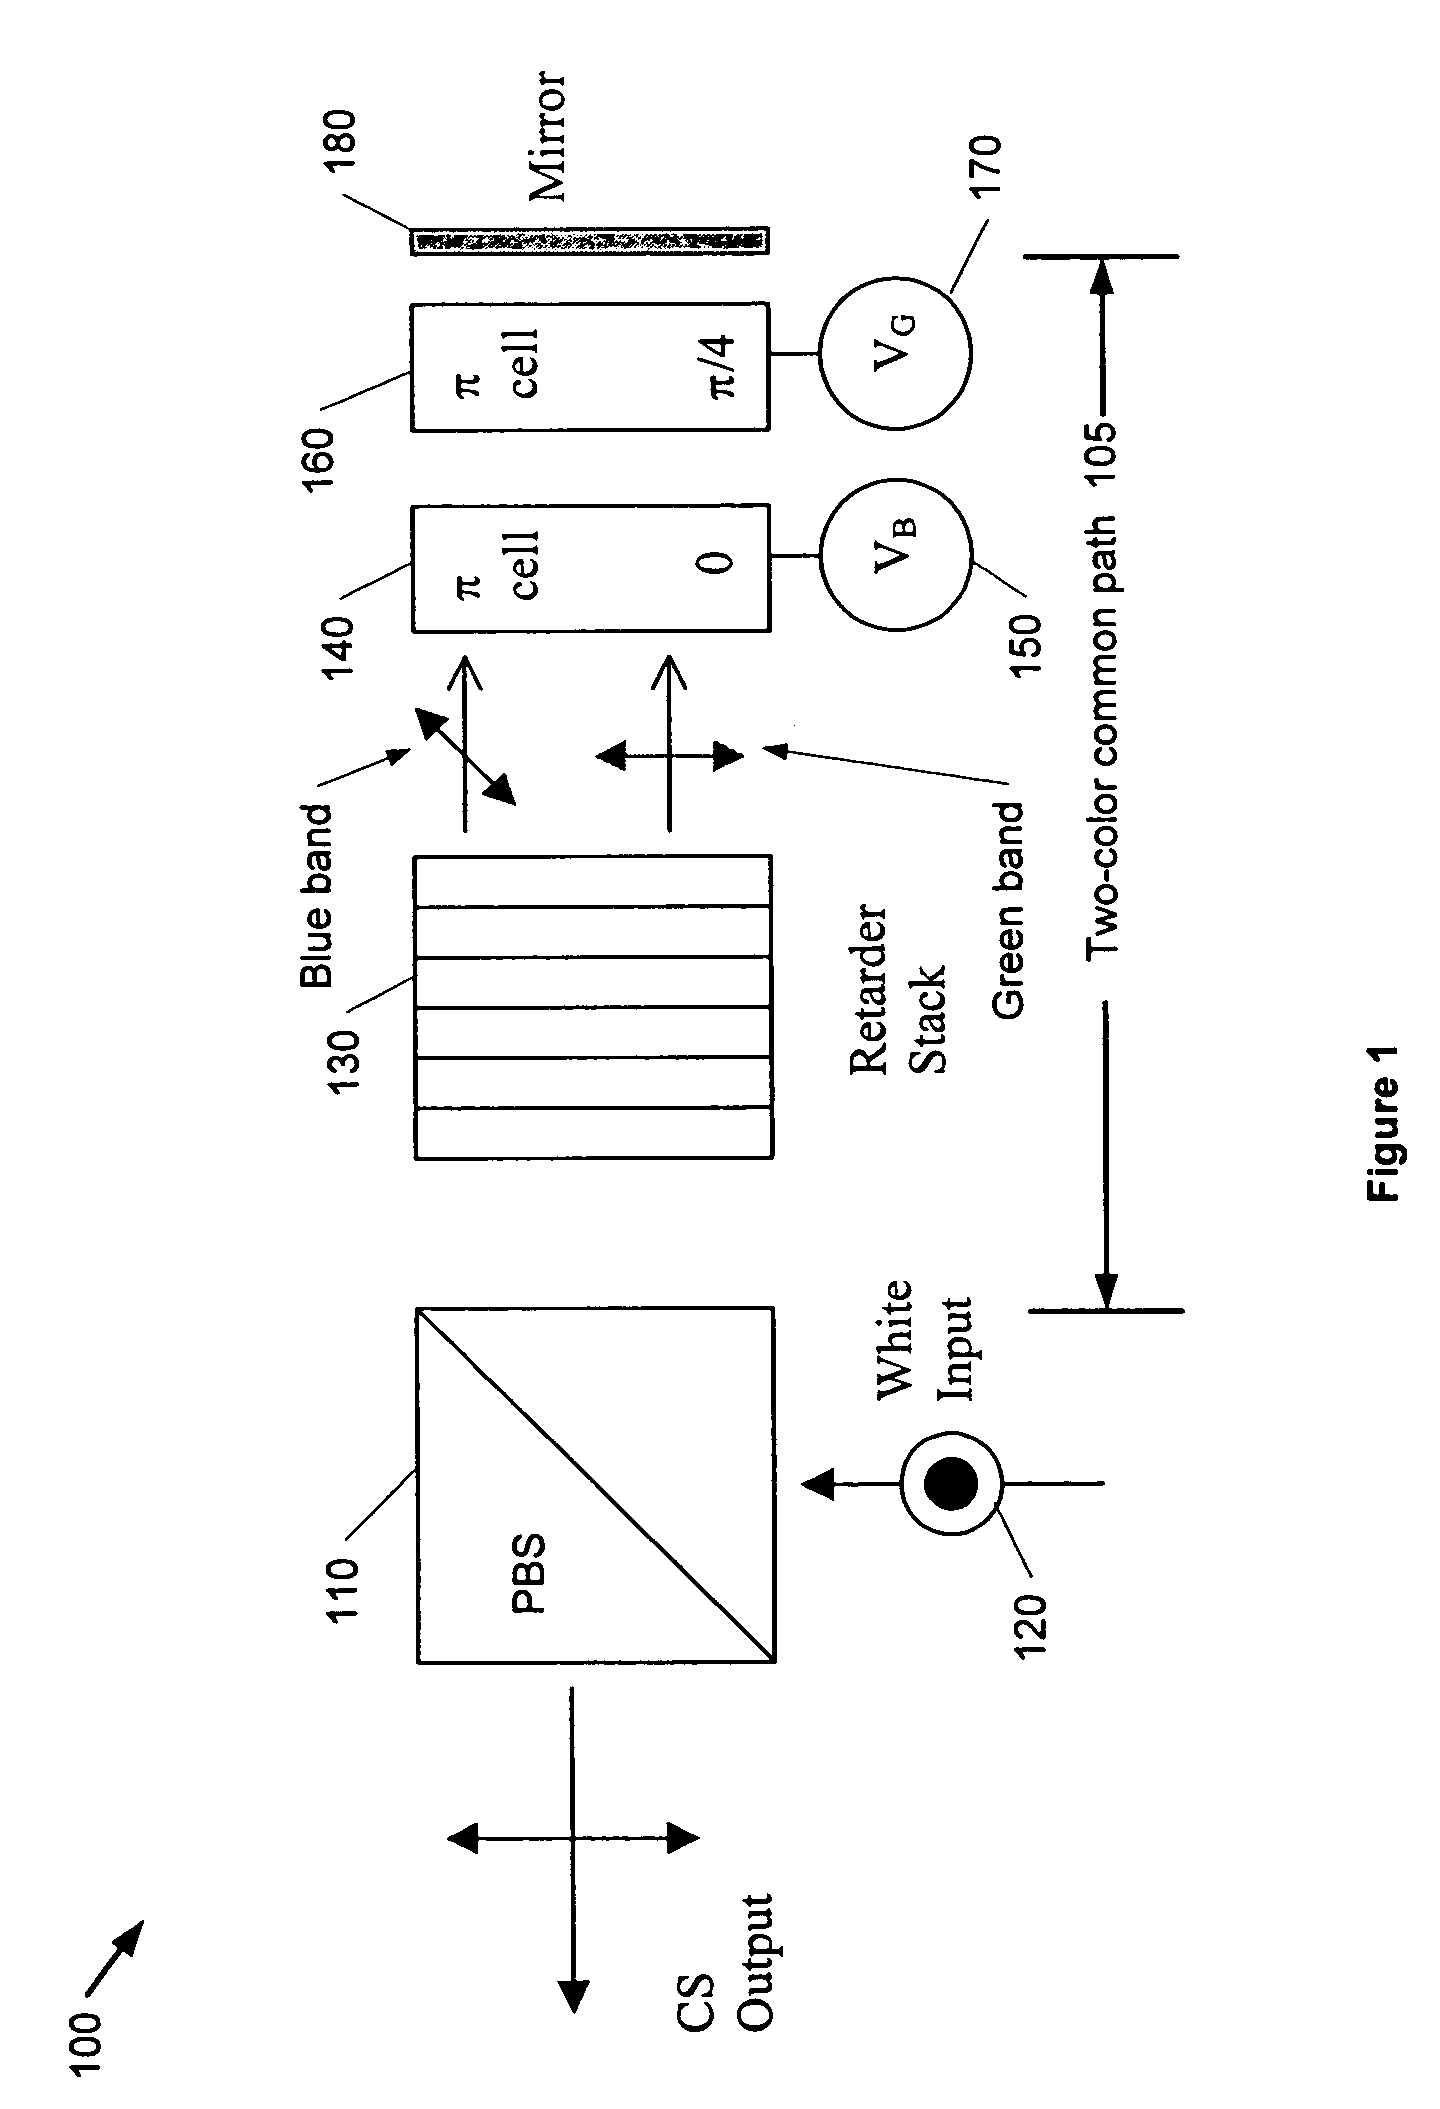 Split-path color switching system and method